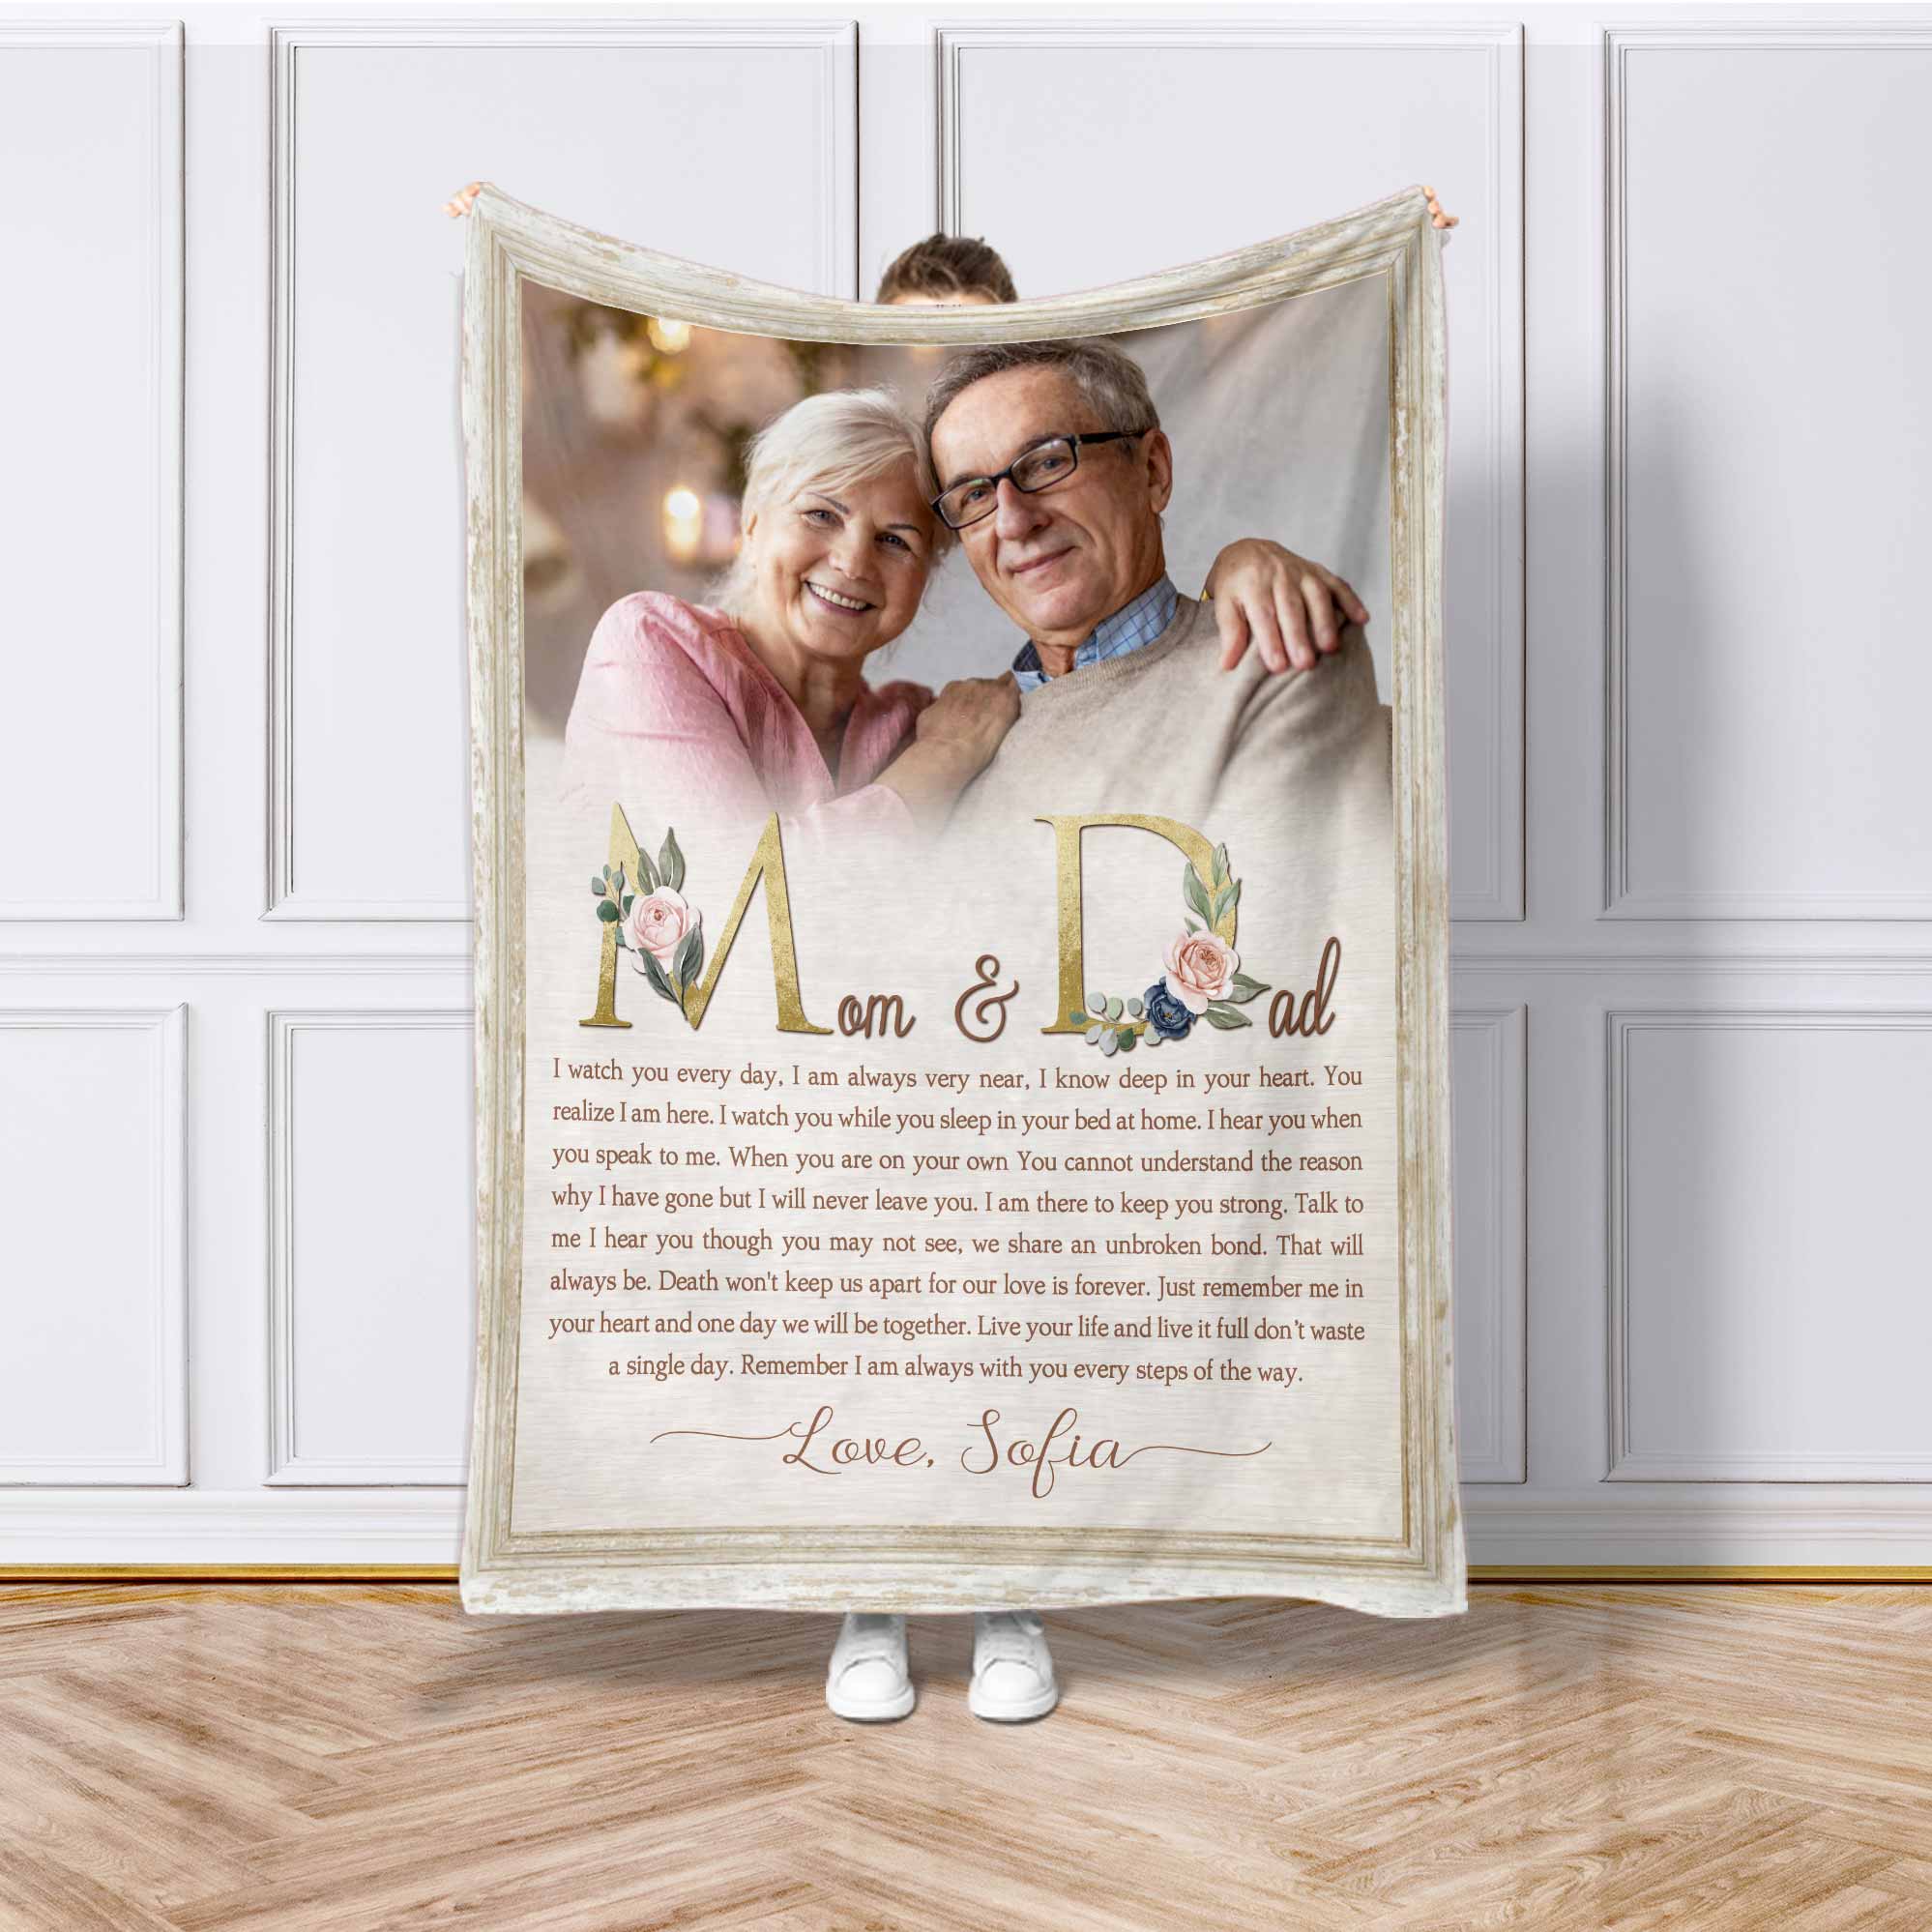 I Never Left You Memorial Blankets With Pictures, Personalized Memory Blankets, Sympathy Throw Blankets